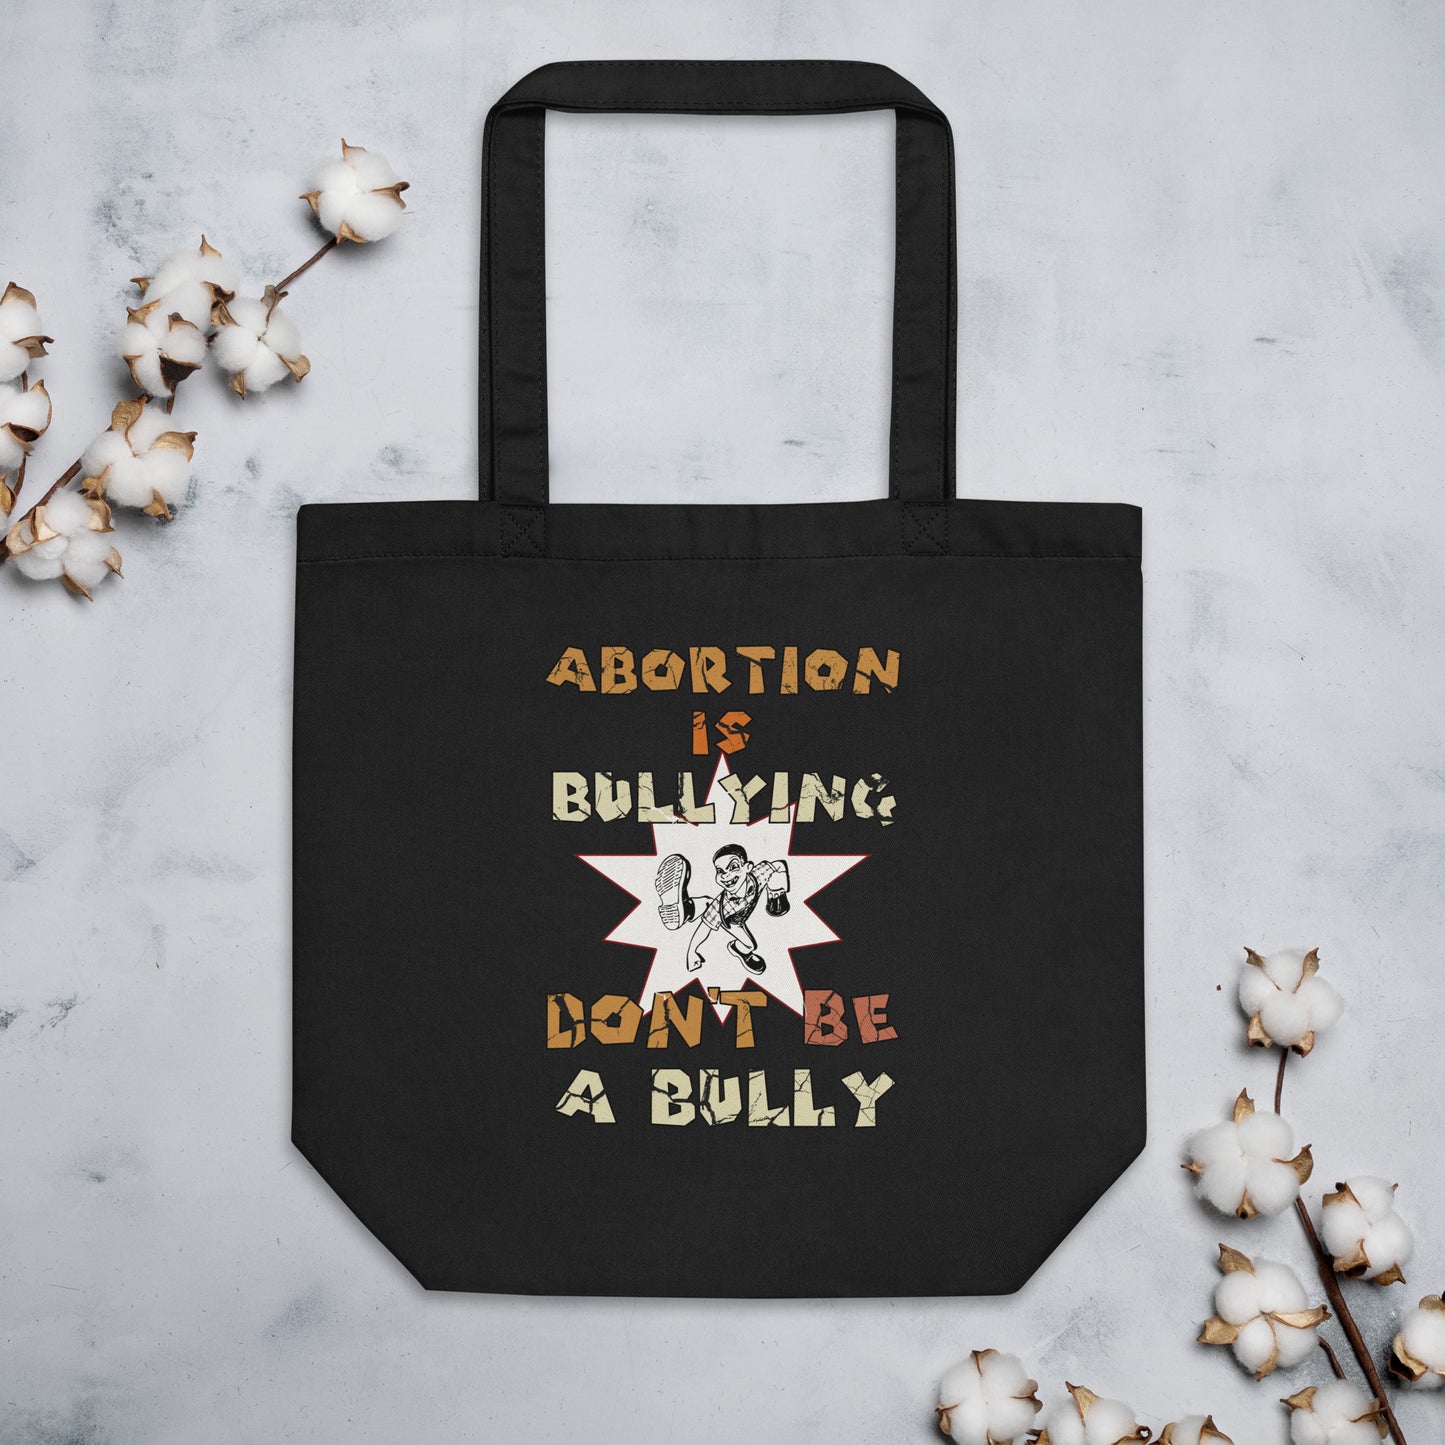 A001 Tote – Eco Tote Bag Featuring Mean Guy Graphic with text “Abortion is Bullying. Don’t be a Bully.”